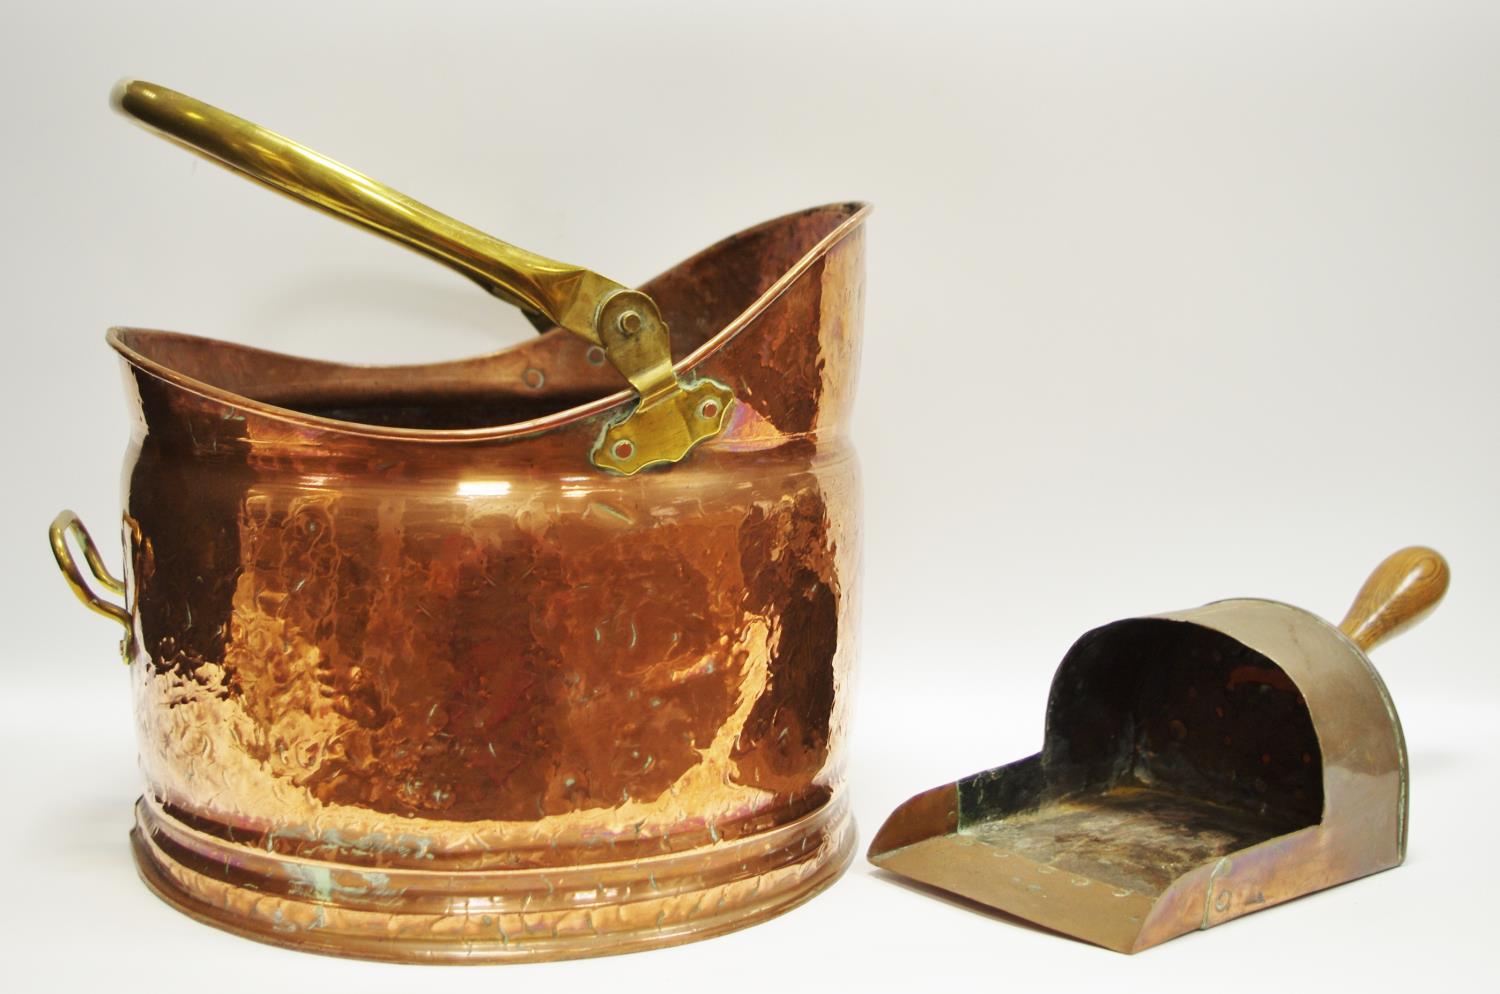 A late Victorian/ early 20th century substantial highly polished copper coal scuttle c.